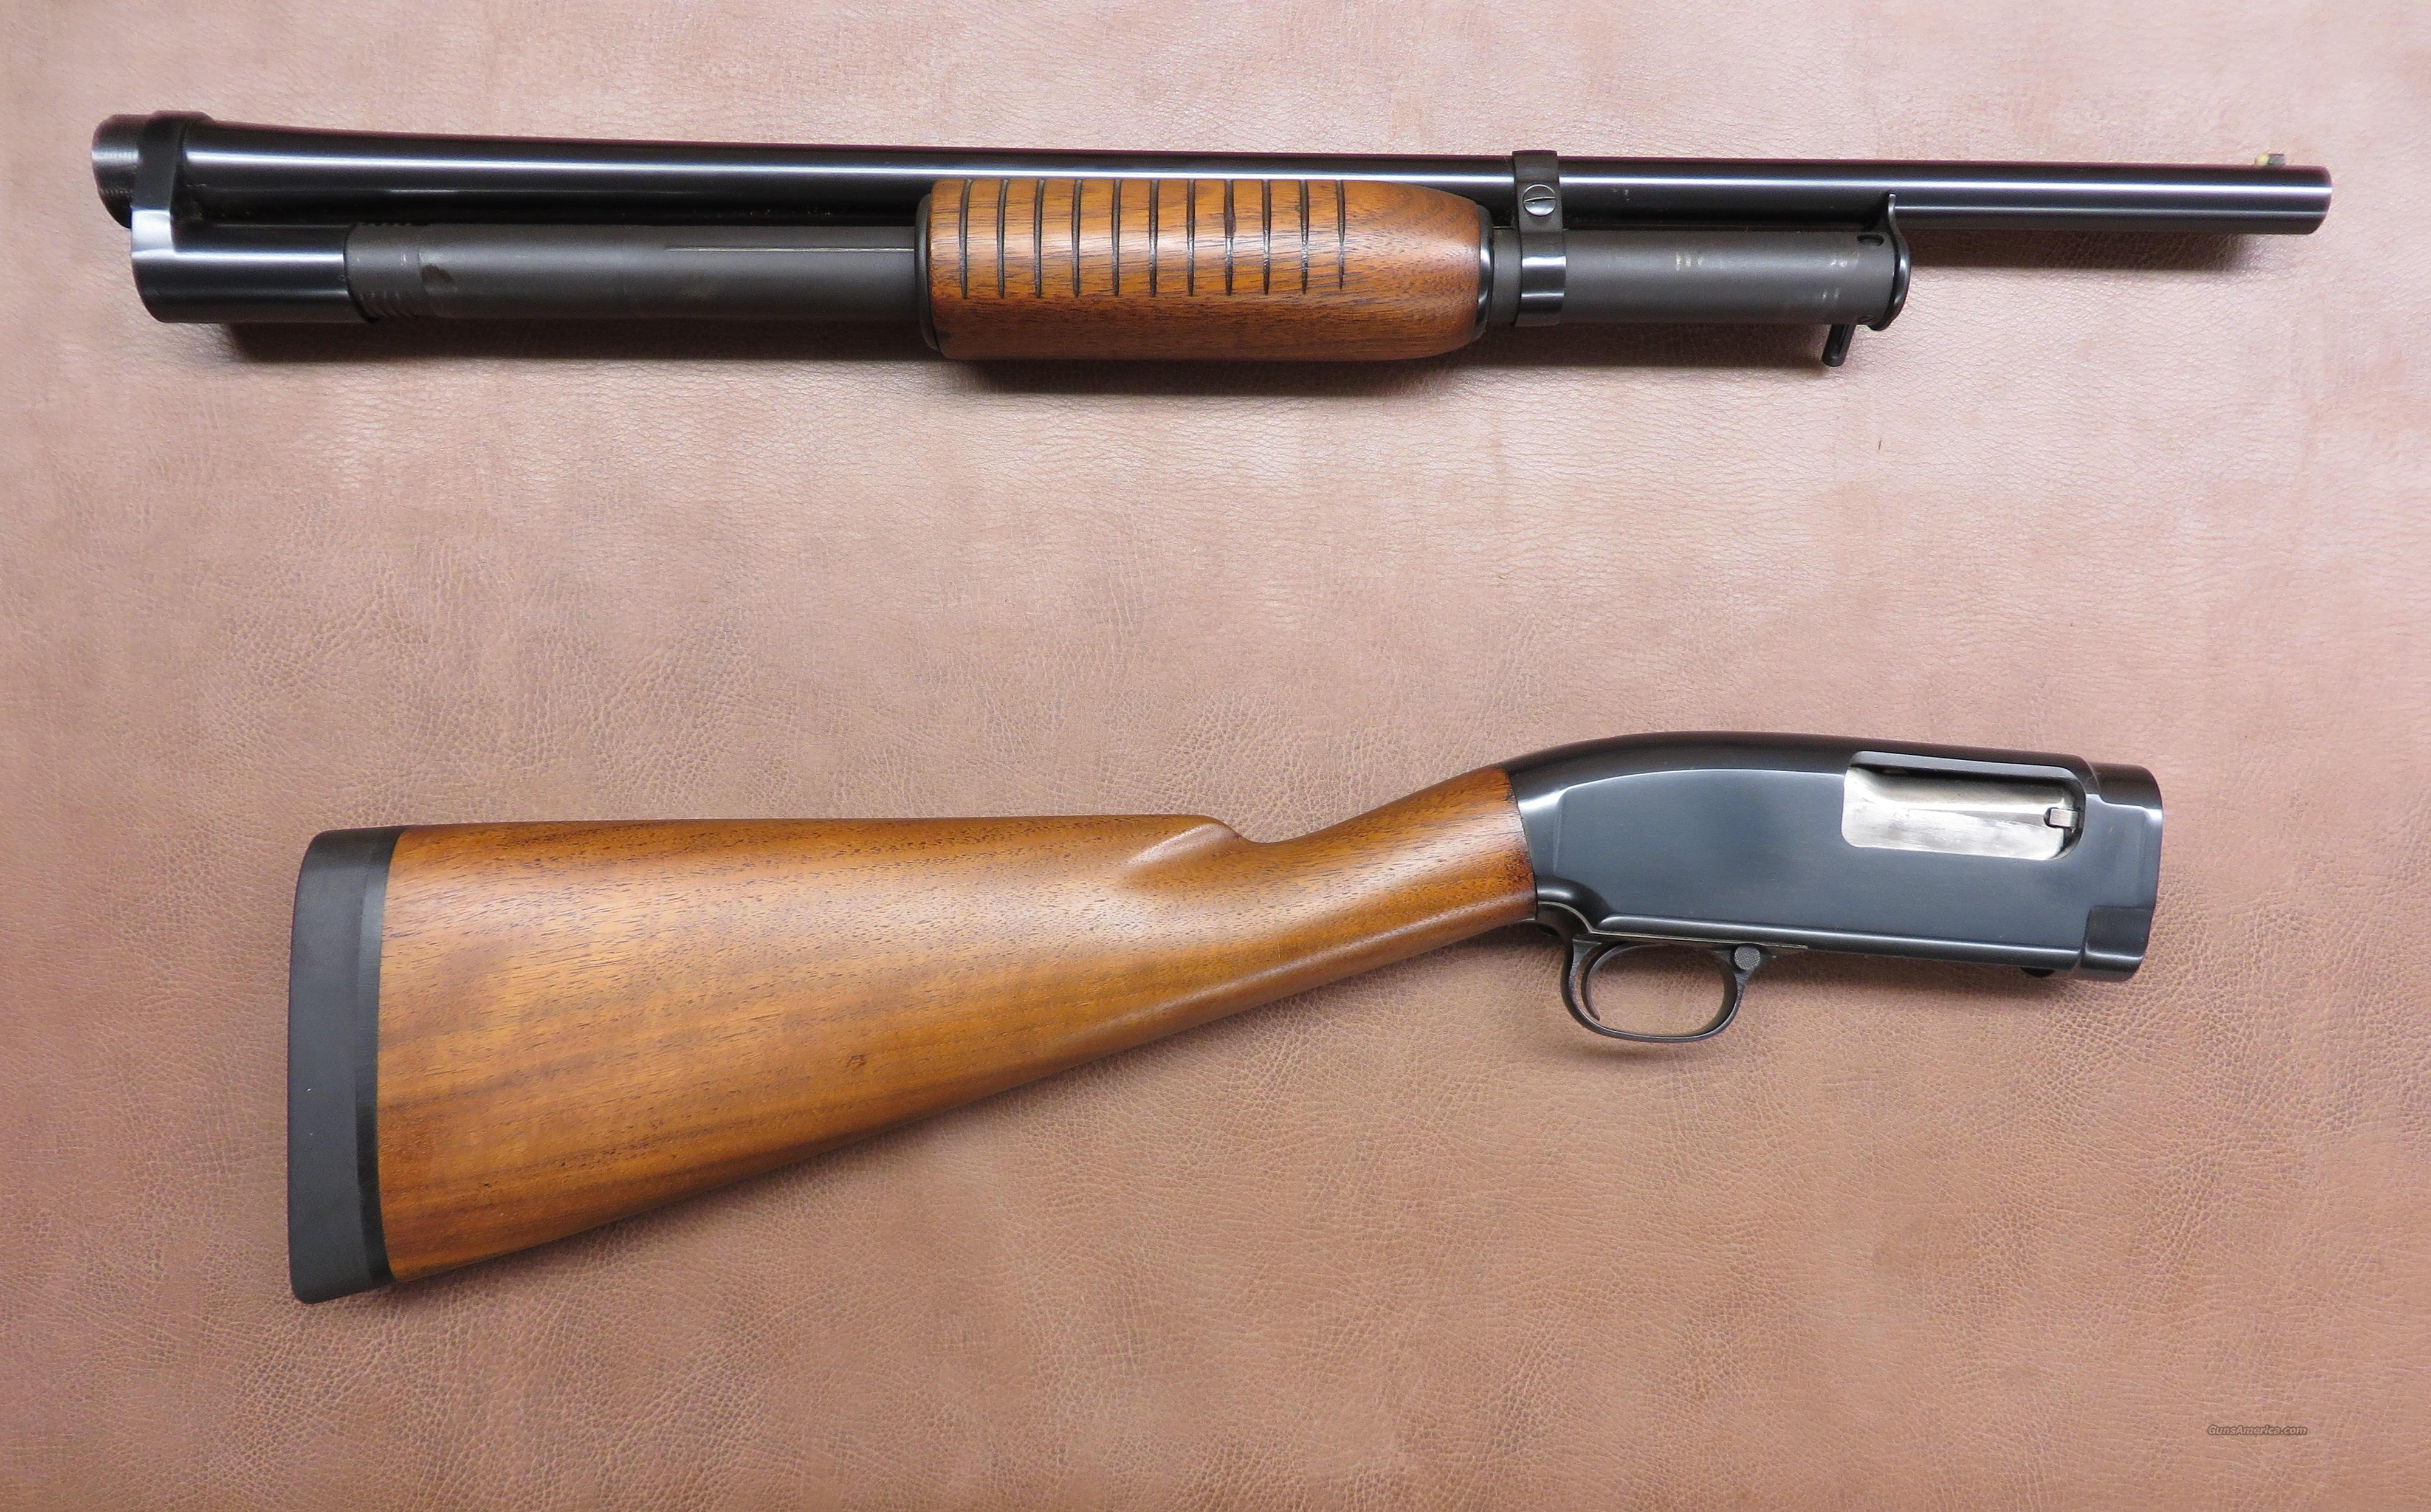 winchester 1300 serial number lookup